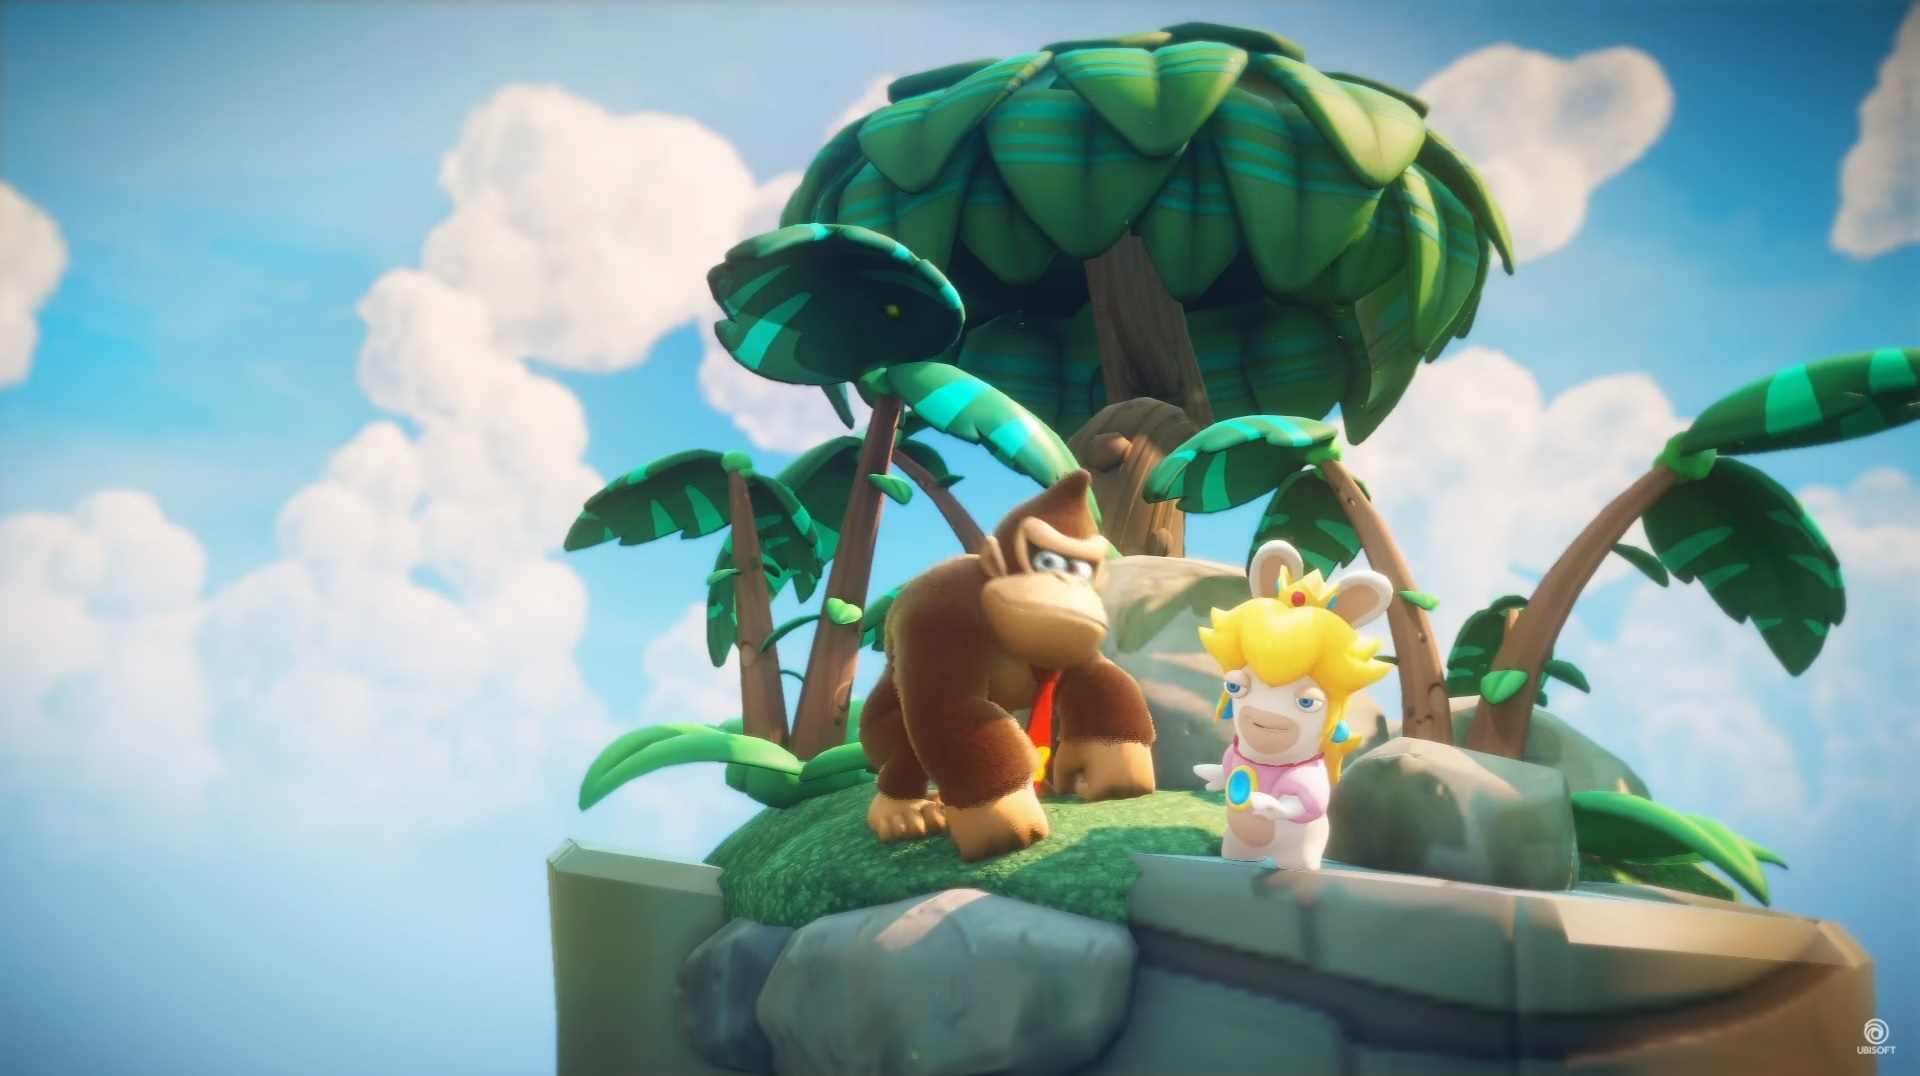 Donkey Kong is joining Mario + Rabbids Kingdom Battle as a playable ...